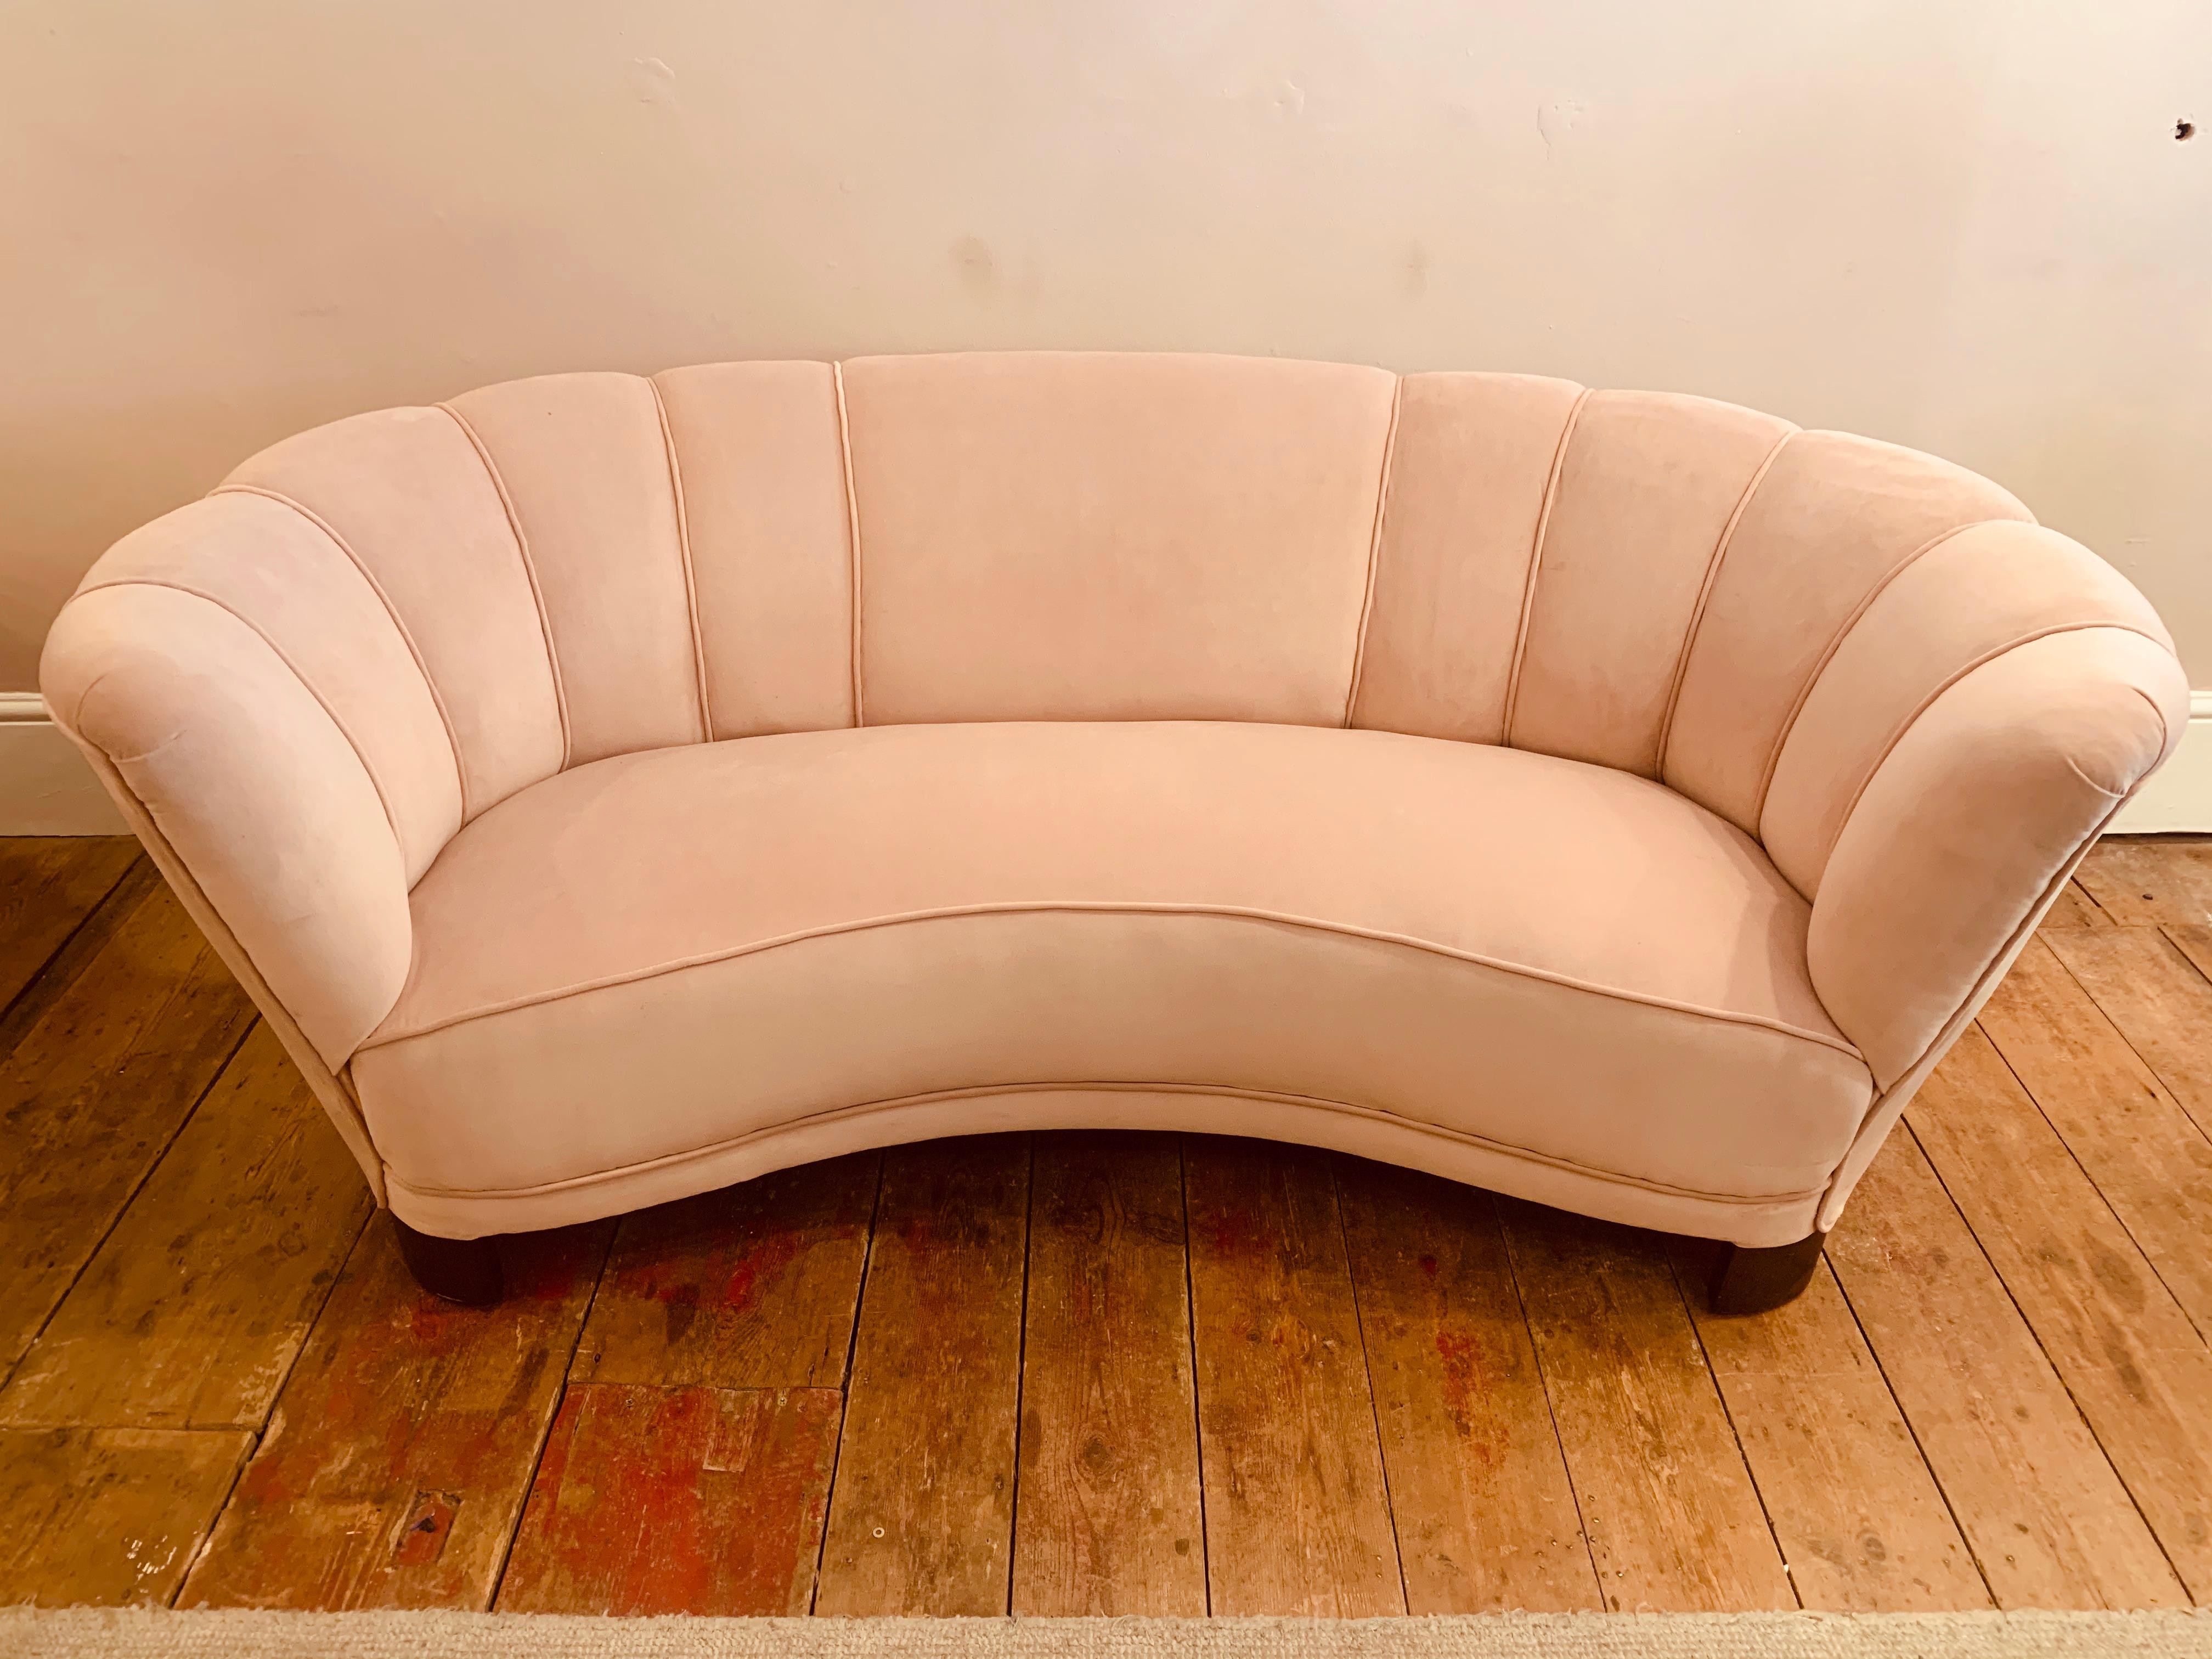 An elegant and imposing 1940s Danish banana-shaped scalloped sofa in the style of Viggo Boesen. The sofa has been newly reupholstered in a blush pink velvet fabric with edged feature piping at the seams and large brown curved wooden block